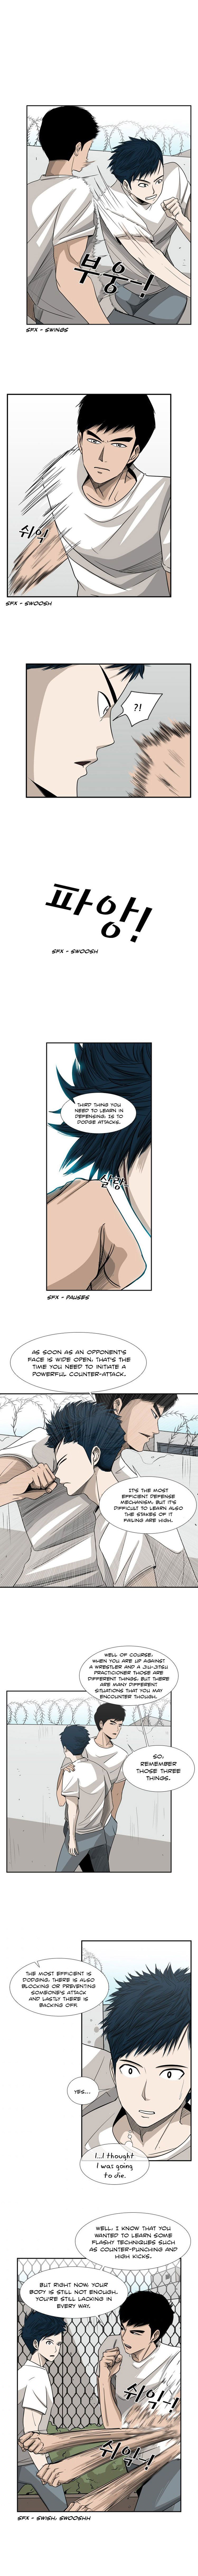 Shark Chapter 16 page 6